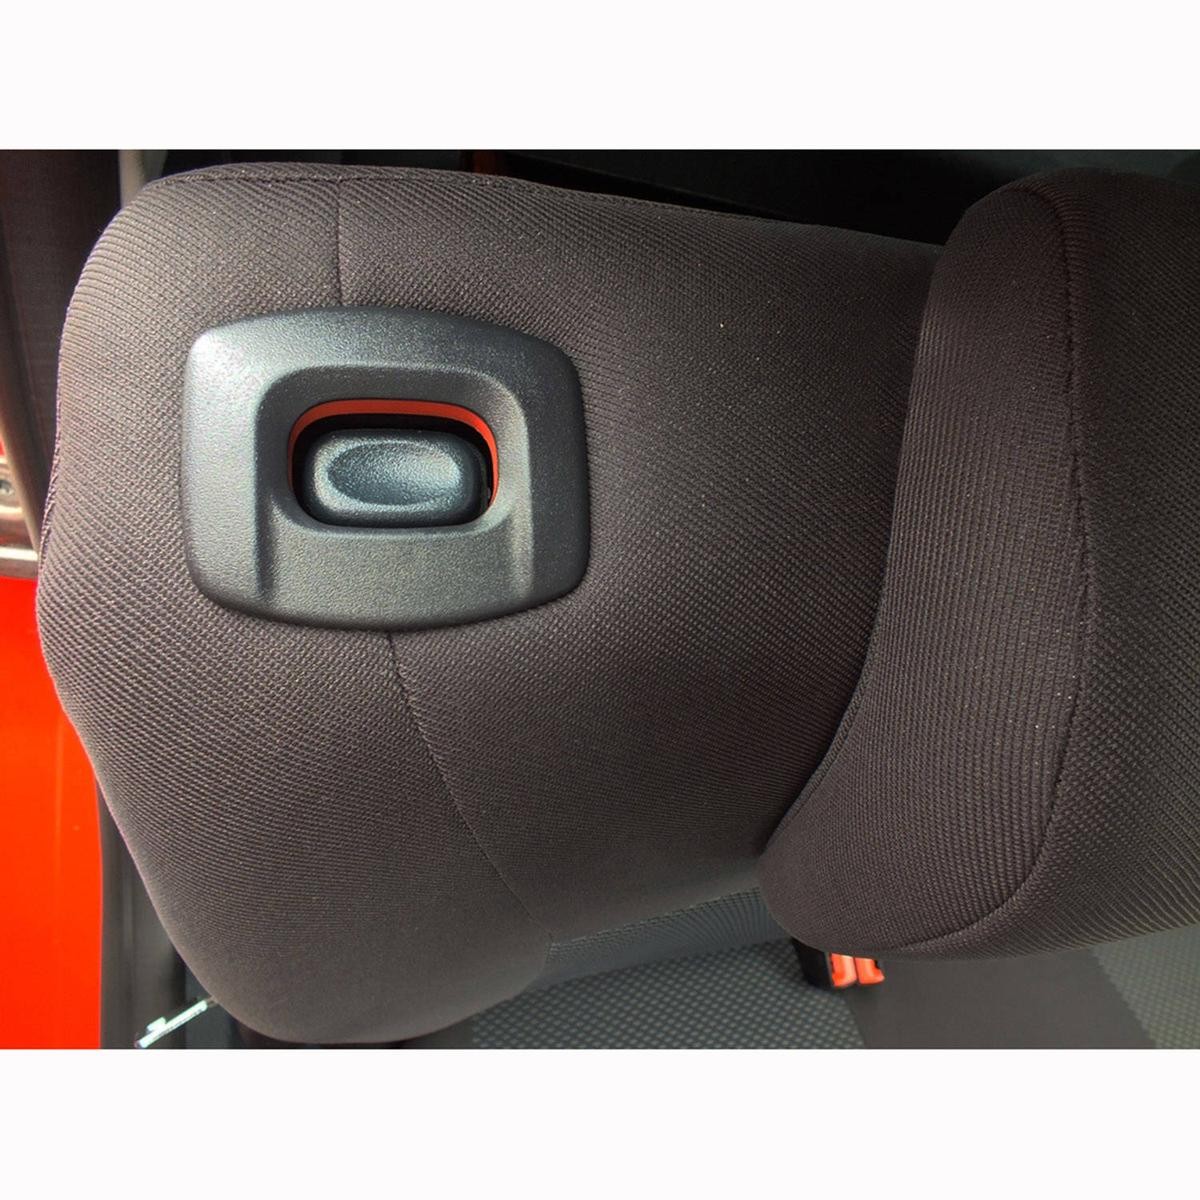 S-/41_T06 Seat cover S-/41_T06 ATRA black, Front and Rear